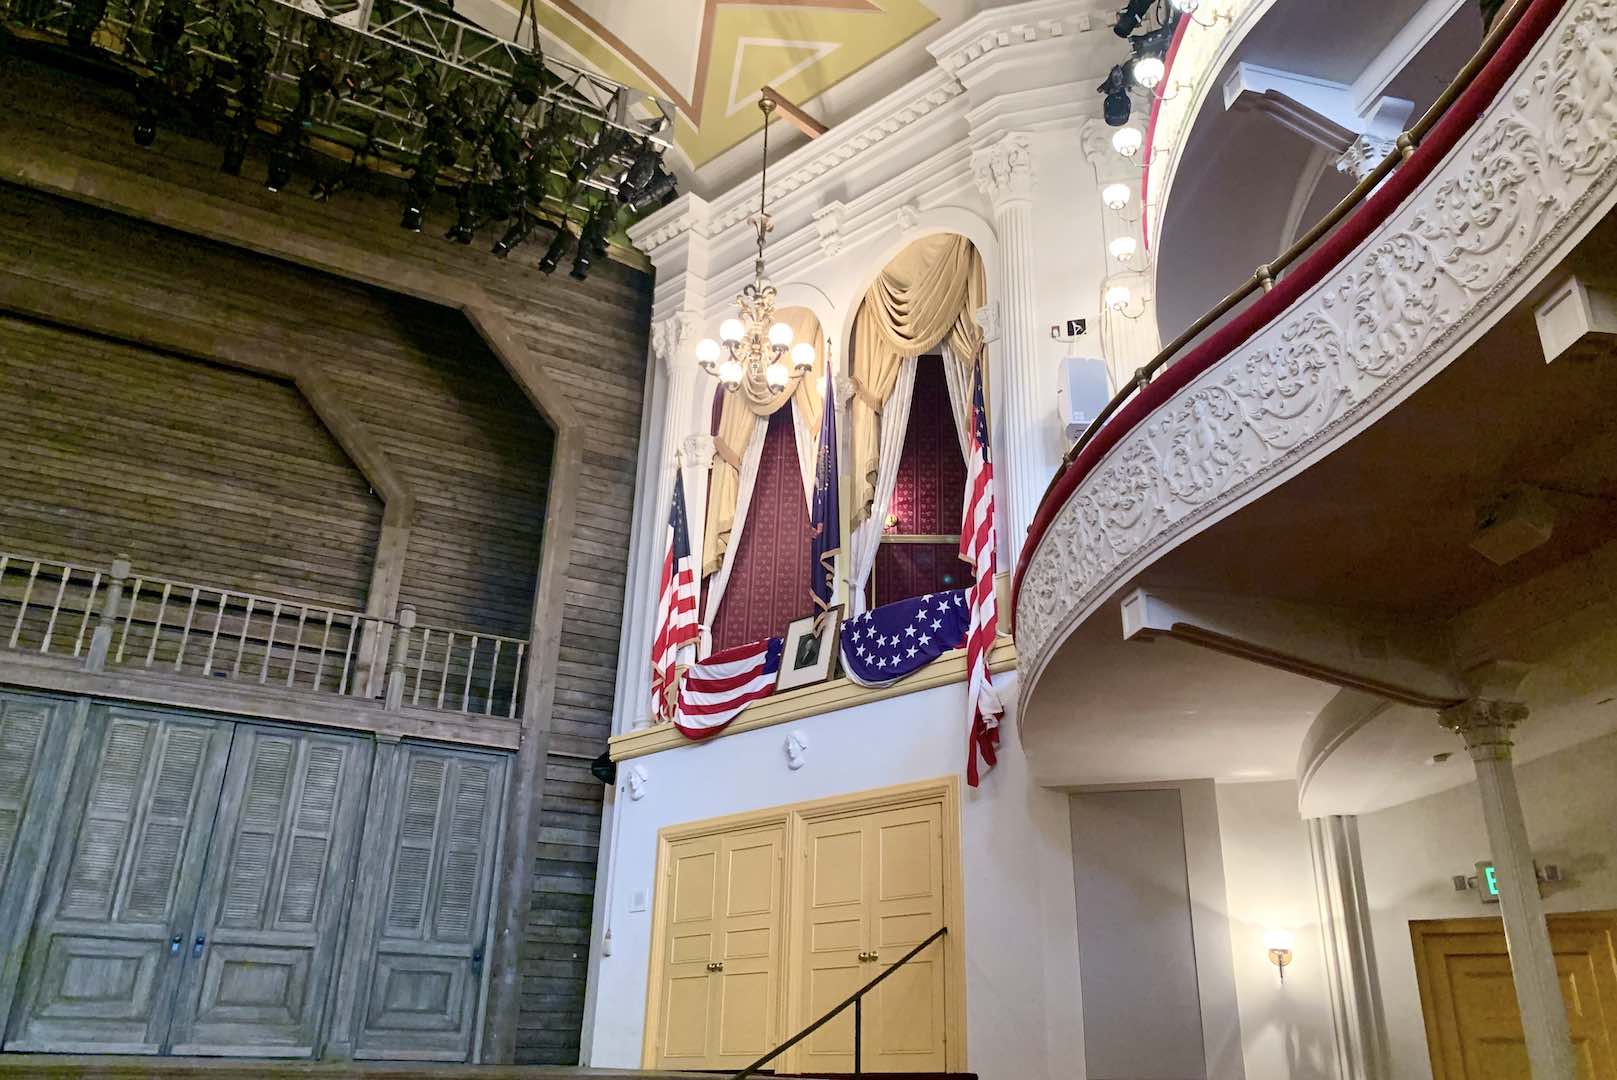 Ford's Theater—where JWB shot Lincoln.